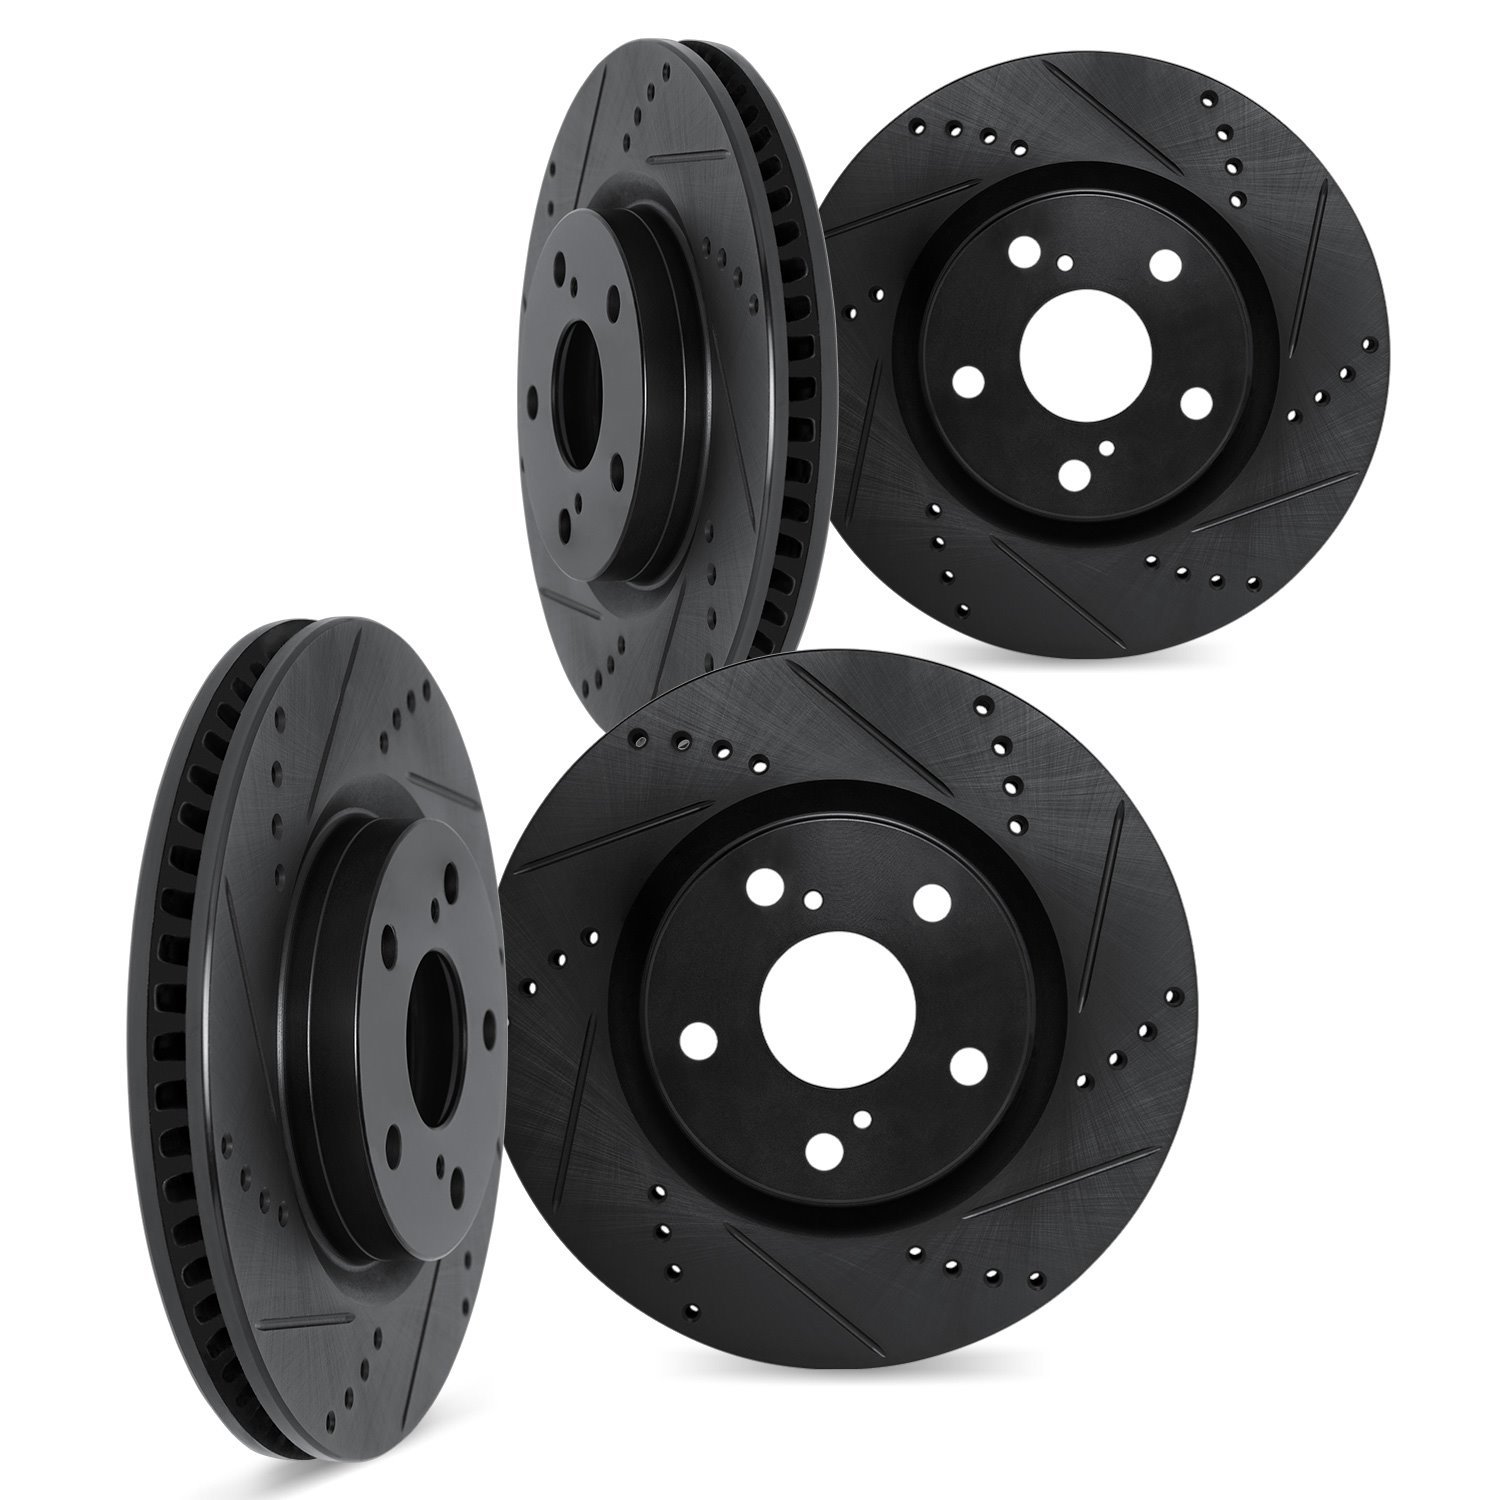 8004-11019 Drilled/Slotted Brake Rotors [Black], 2006-2009 Land Rover, Position: Front and Rear